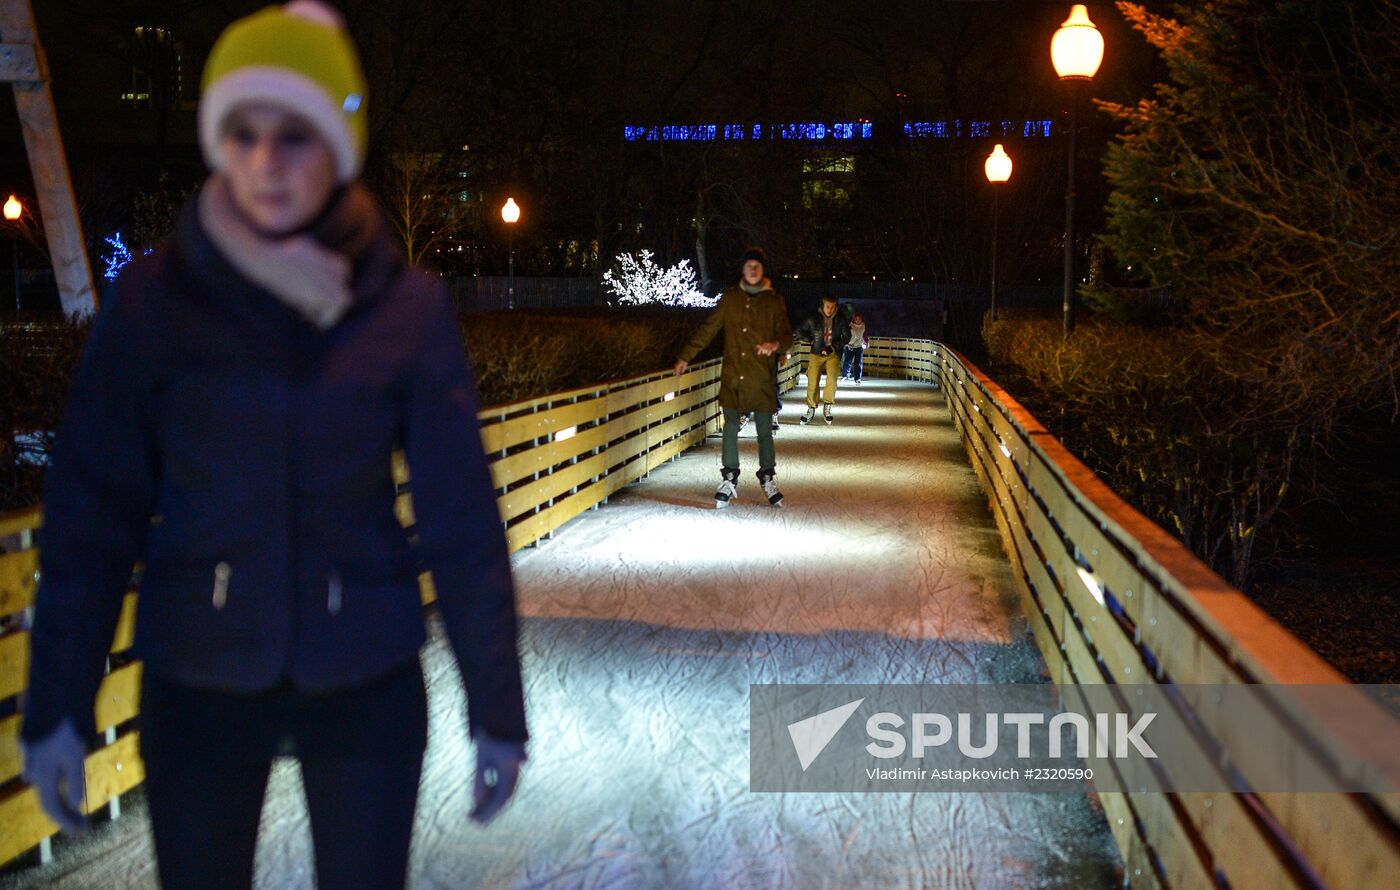 Opening of the Central Ice Skating Rink in Gorky Park